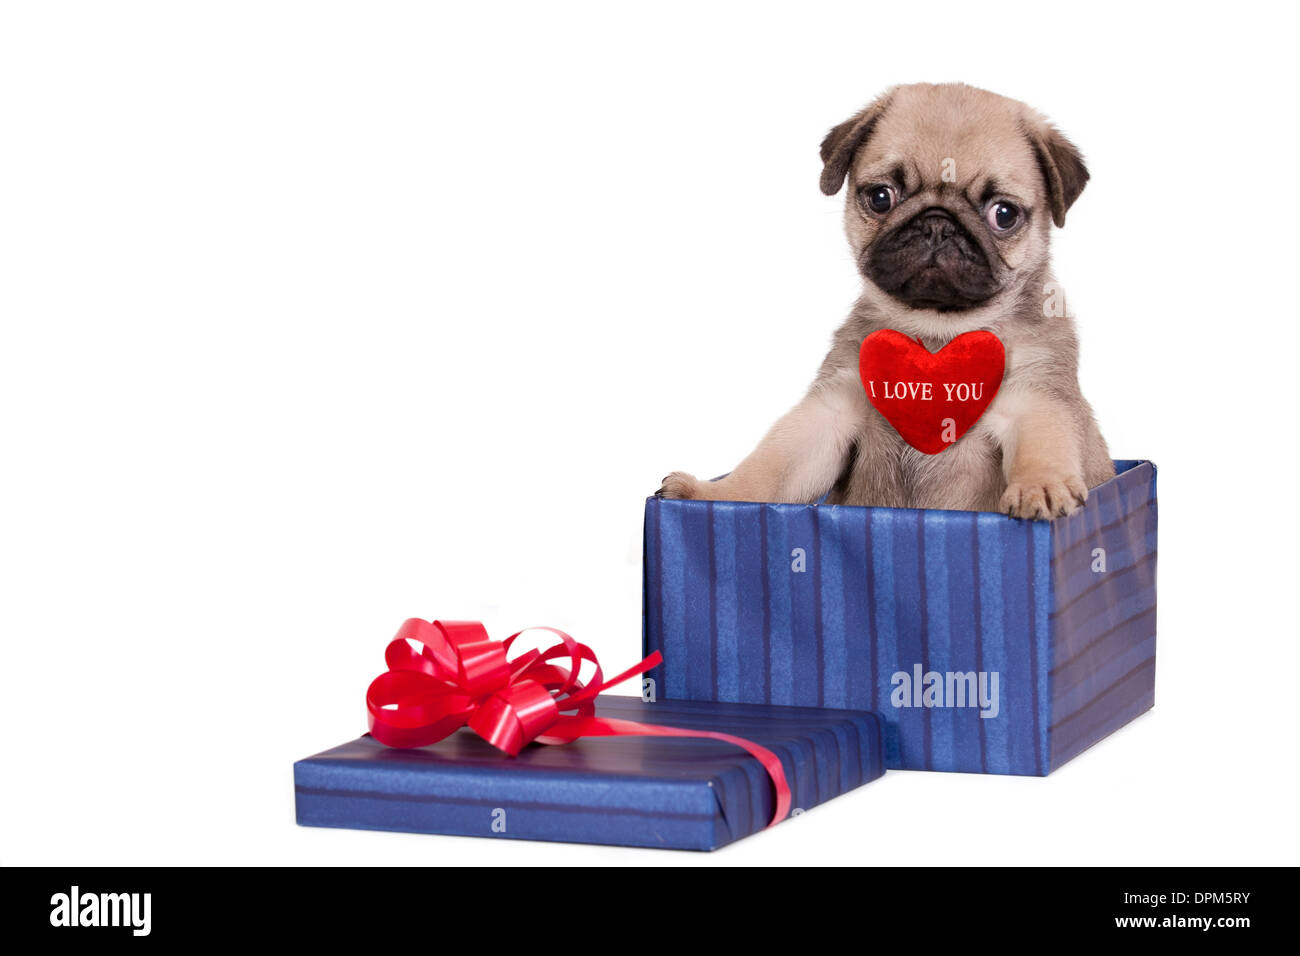 Pug puppy with sign 'I Love You' in a gift box.Isolated on white background with space for text. Stock Photo